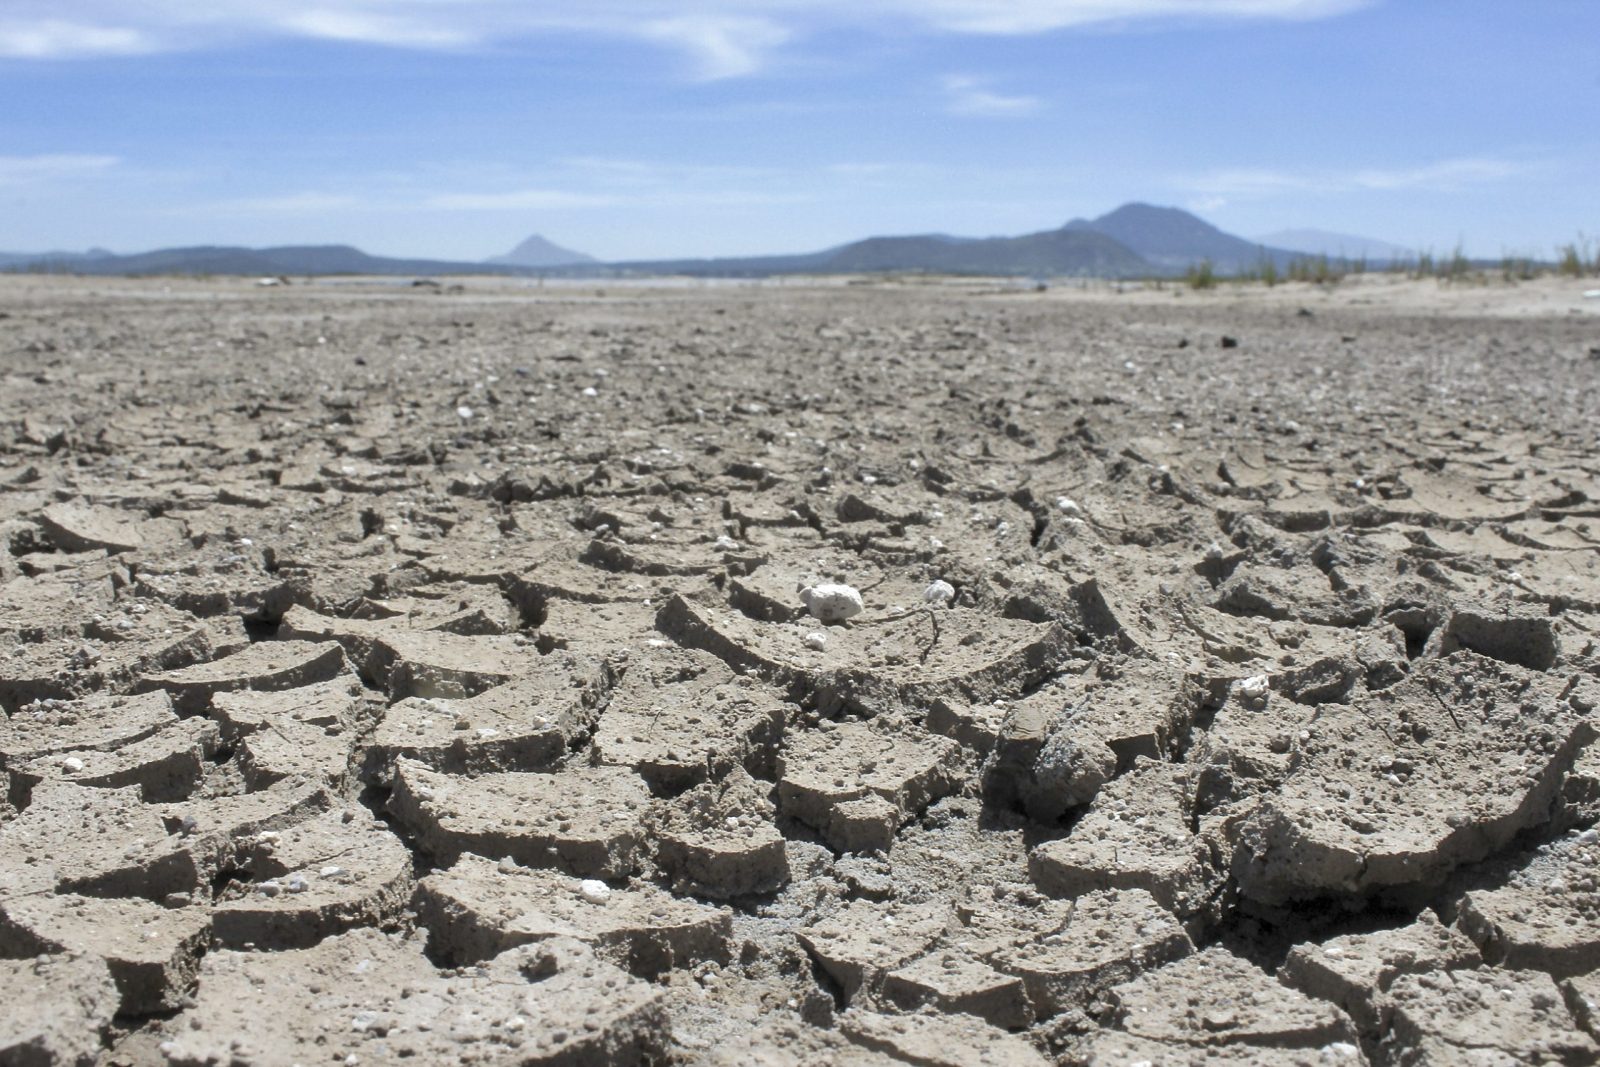 Mexico Experiences Dangerous Drought While Companies like Coca-Cola and Heineken Take Billions of Liters of Water From Public Reservoirs